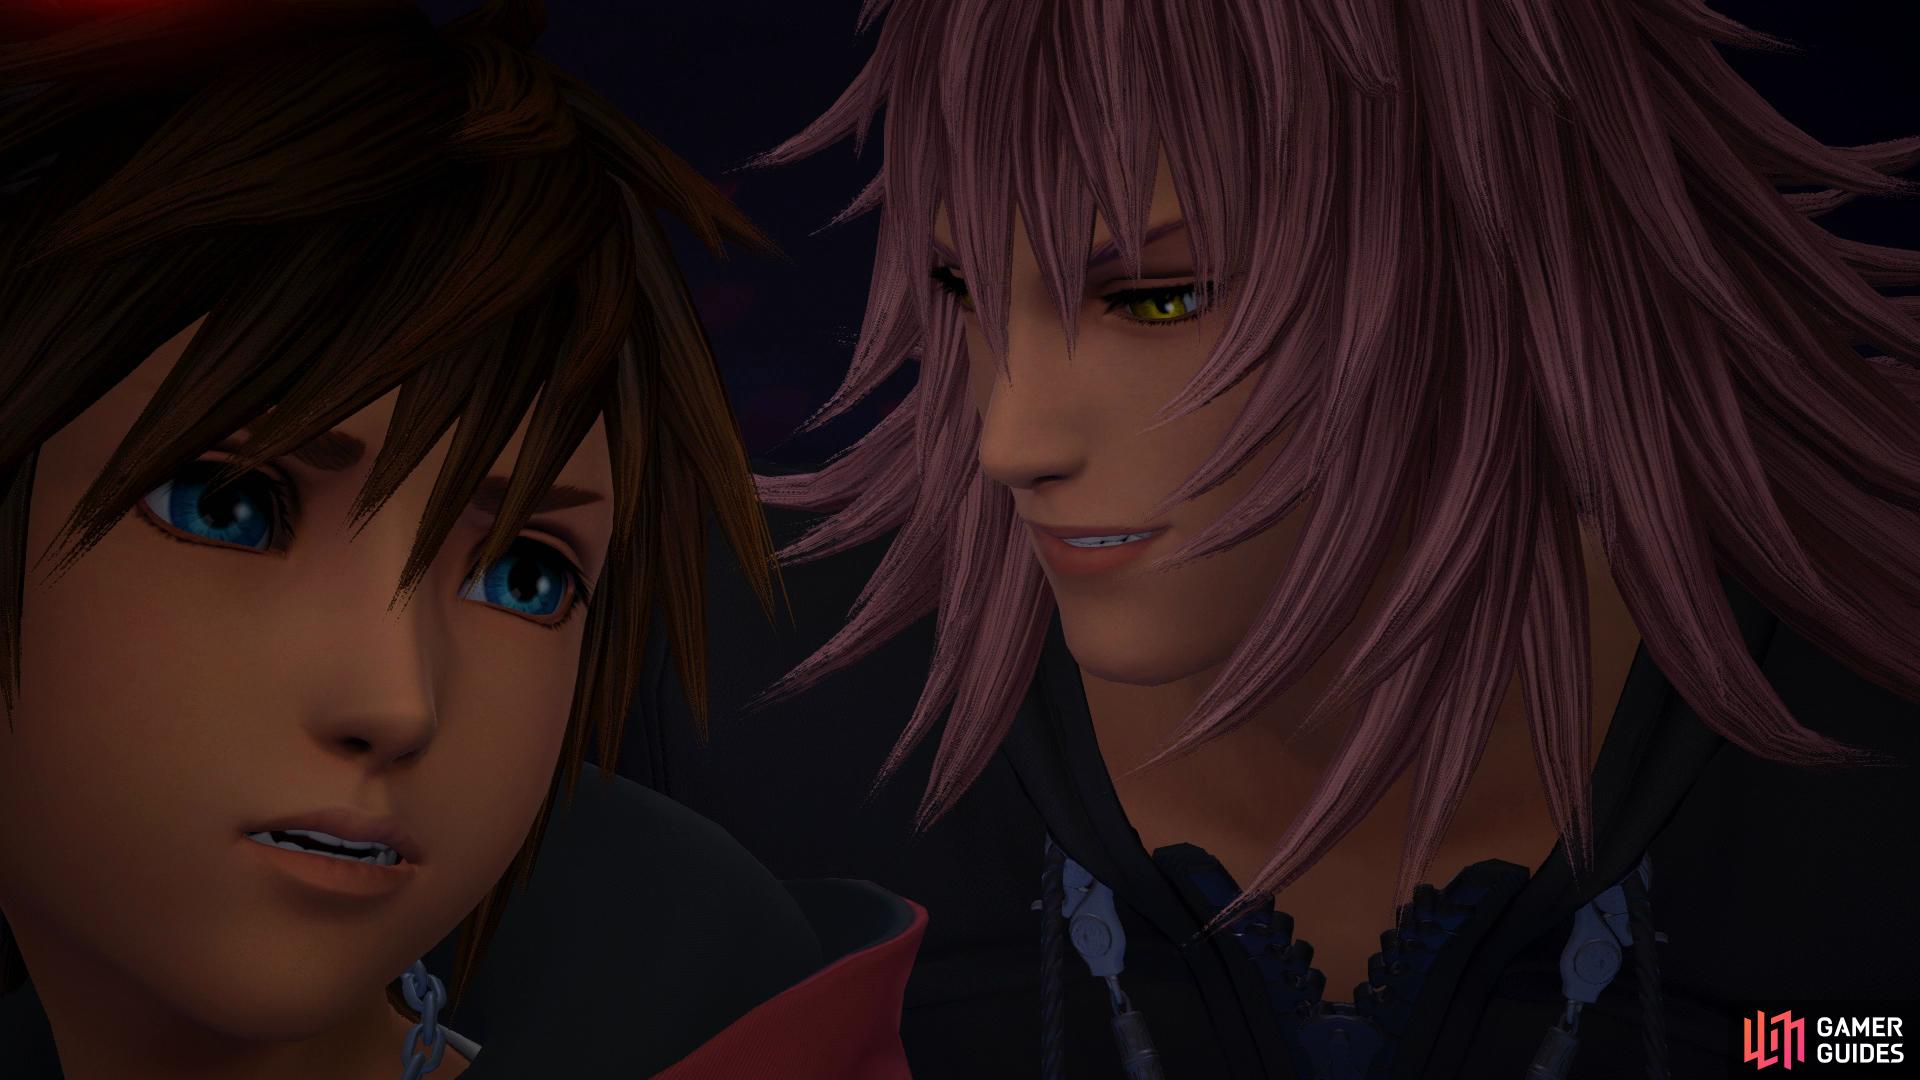 hell cast a Doom Counter on Sora when whispering into his ear